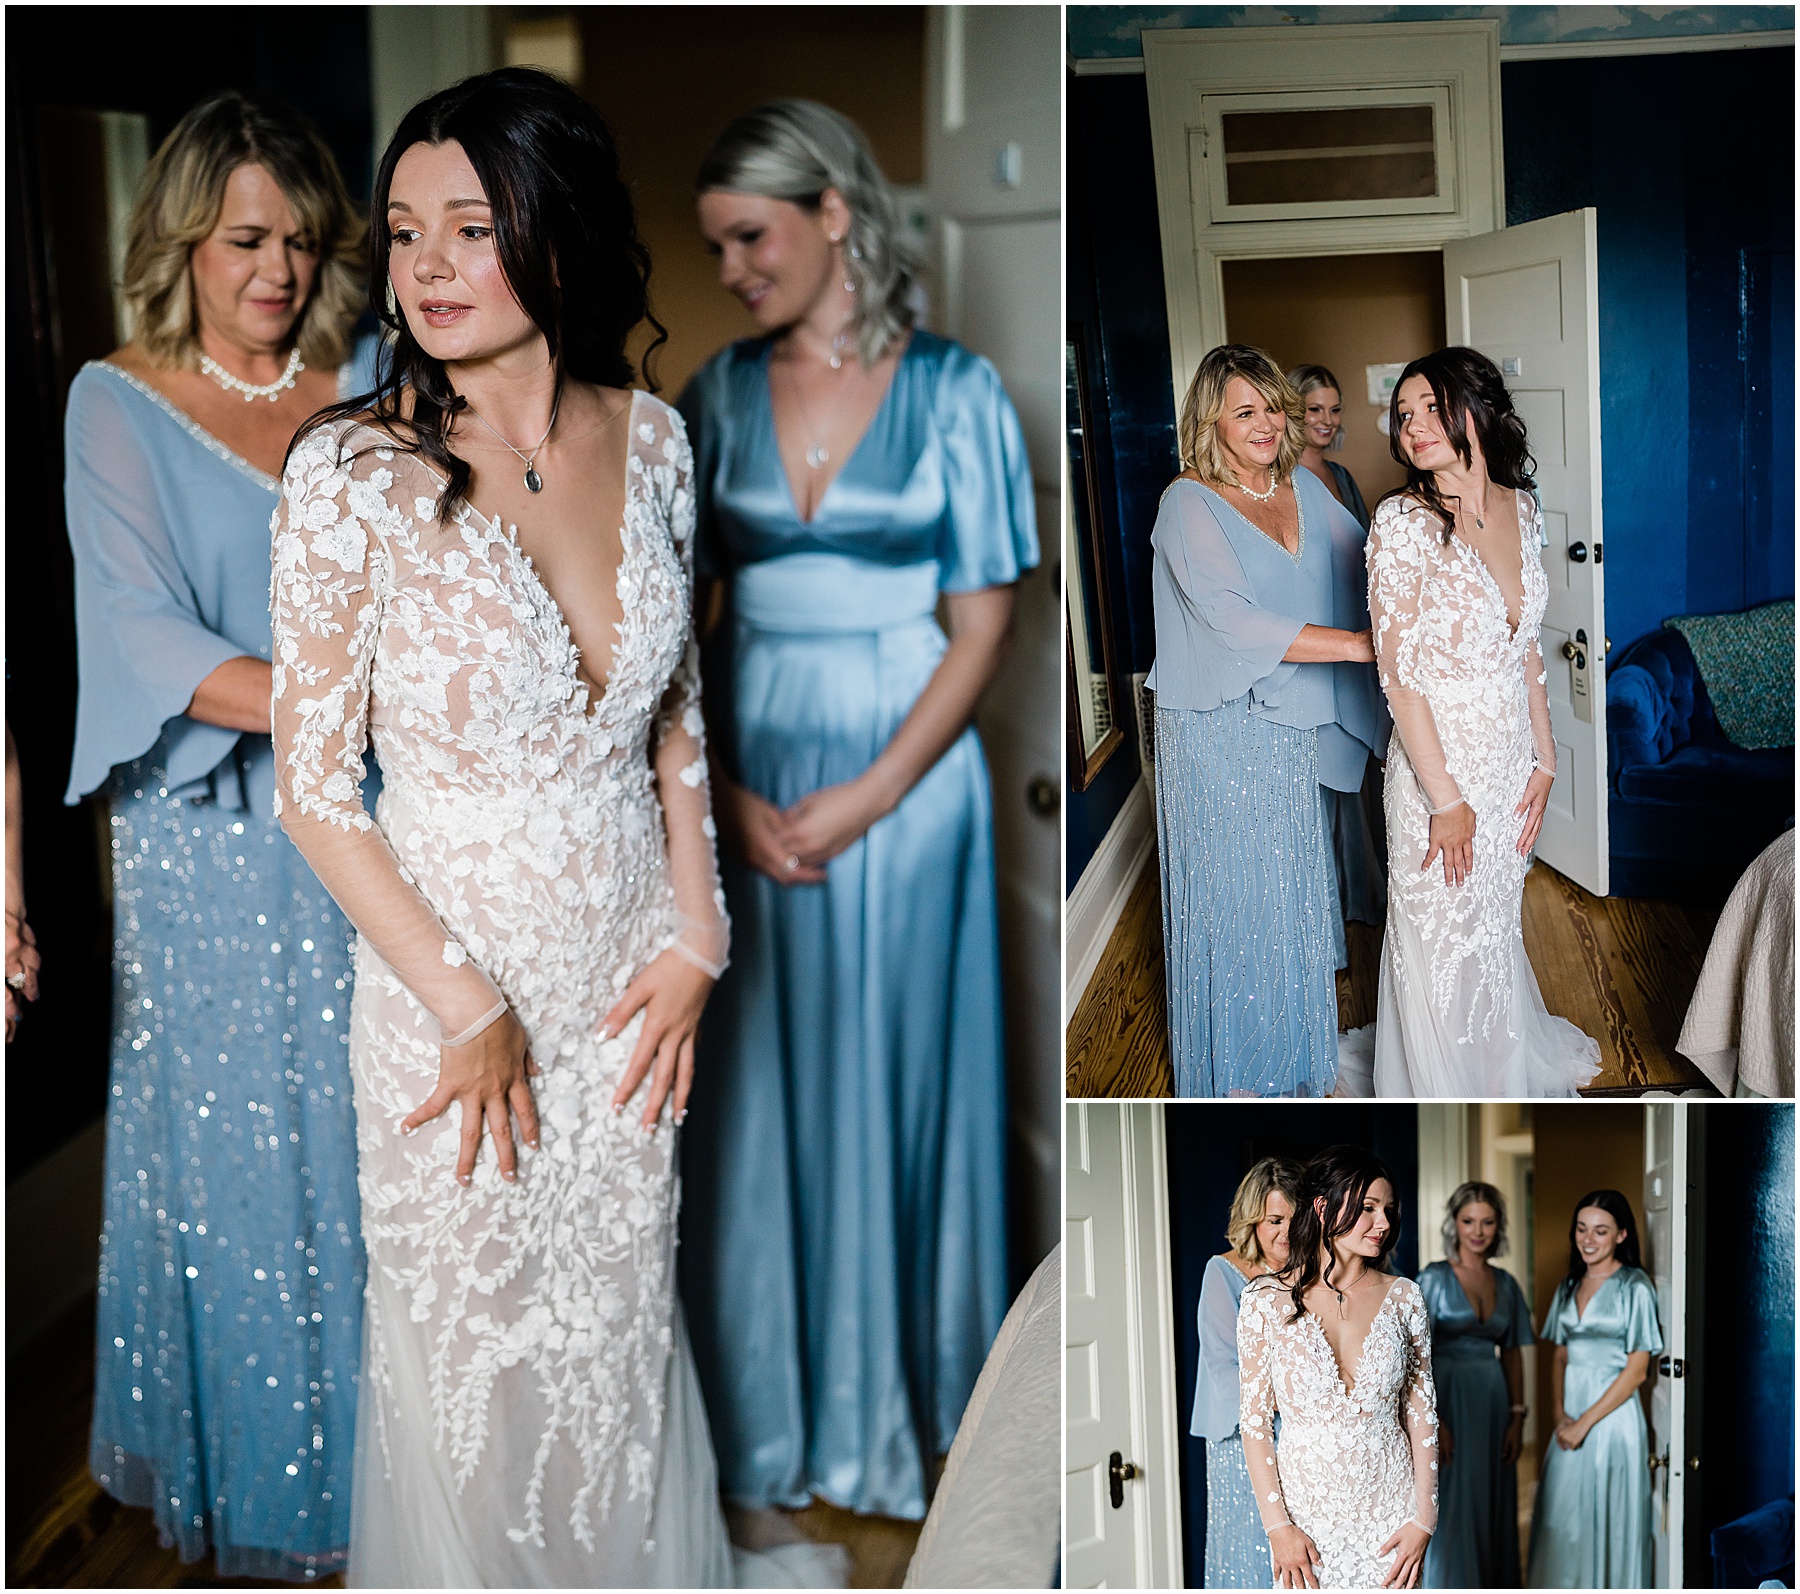 Fort Wayne wedding photographer captures bride getting ready with bridesmaids and mother before Baker Train Station wedding